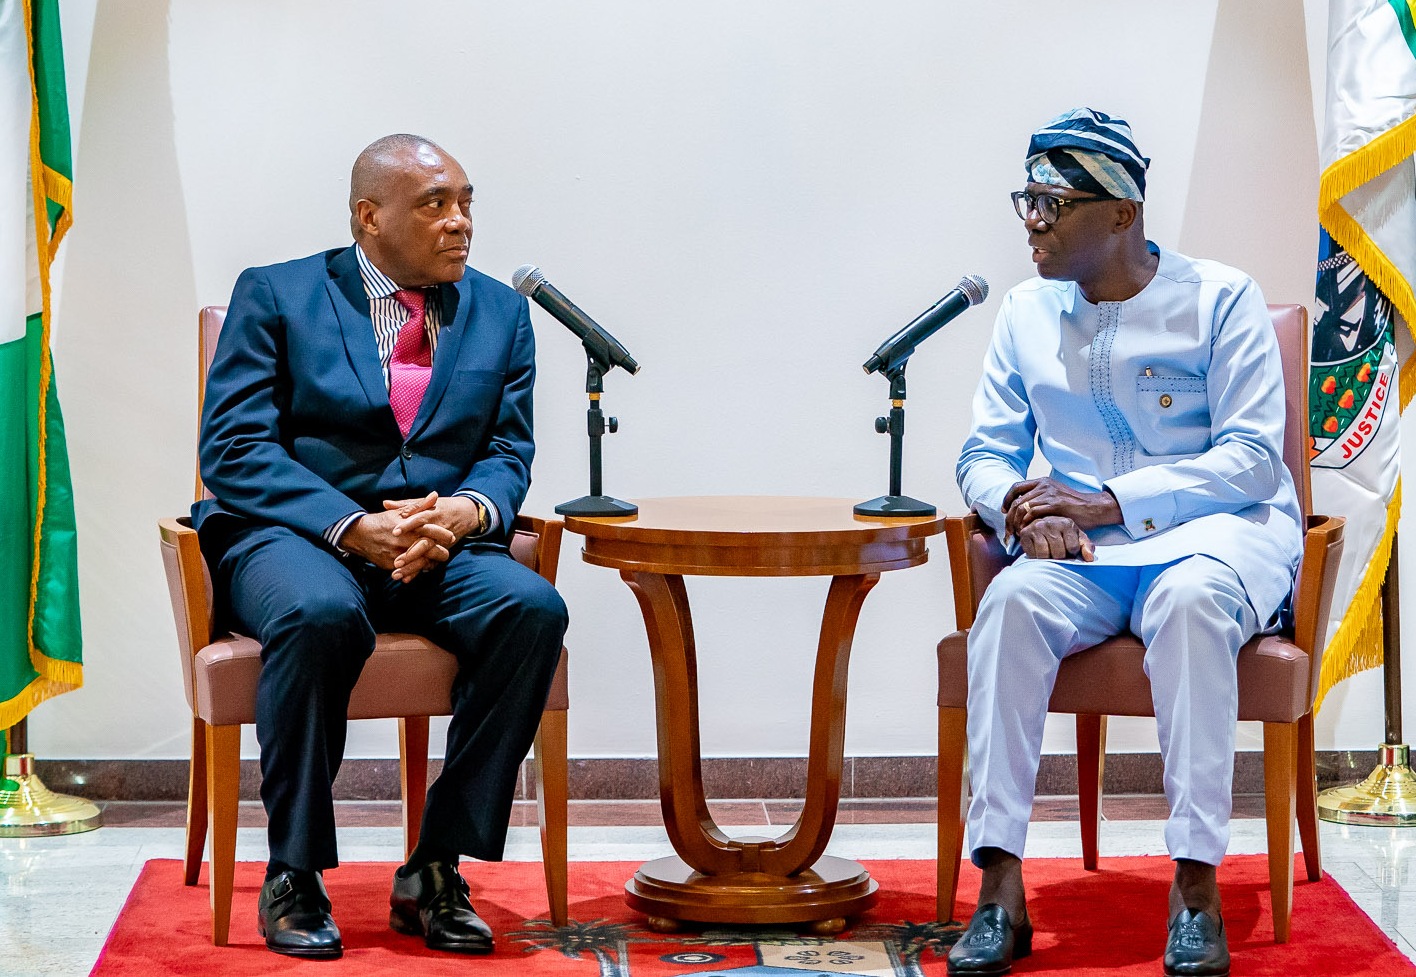 R-L: Lagos State Governor, Mr. Babajide Sanwo-Olu, making his remark during a courtesy visit by the Executive management of Dangote Cement Plc, led by the Independent Non-Executive Director, Mr. Emmanuel Ikazoboh, at Lagos House, Marina, on Wednesday, March 18, 2020.